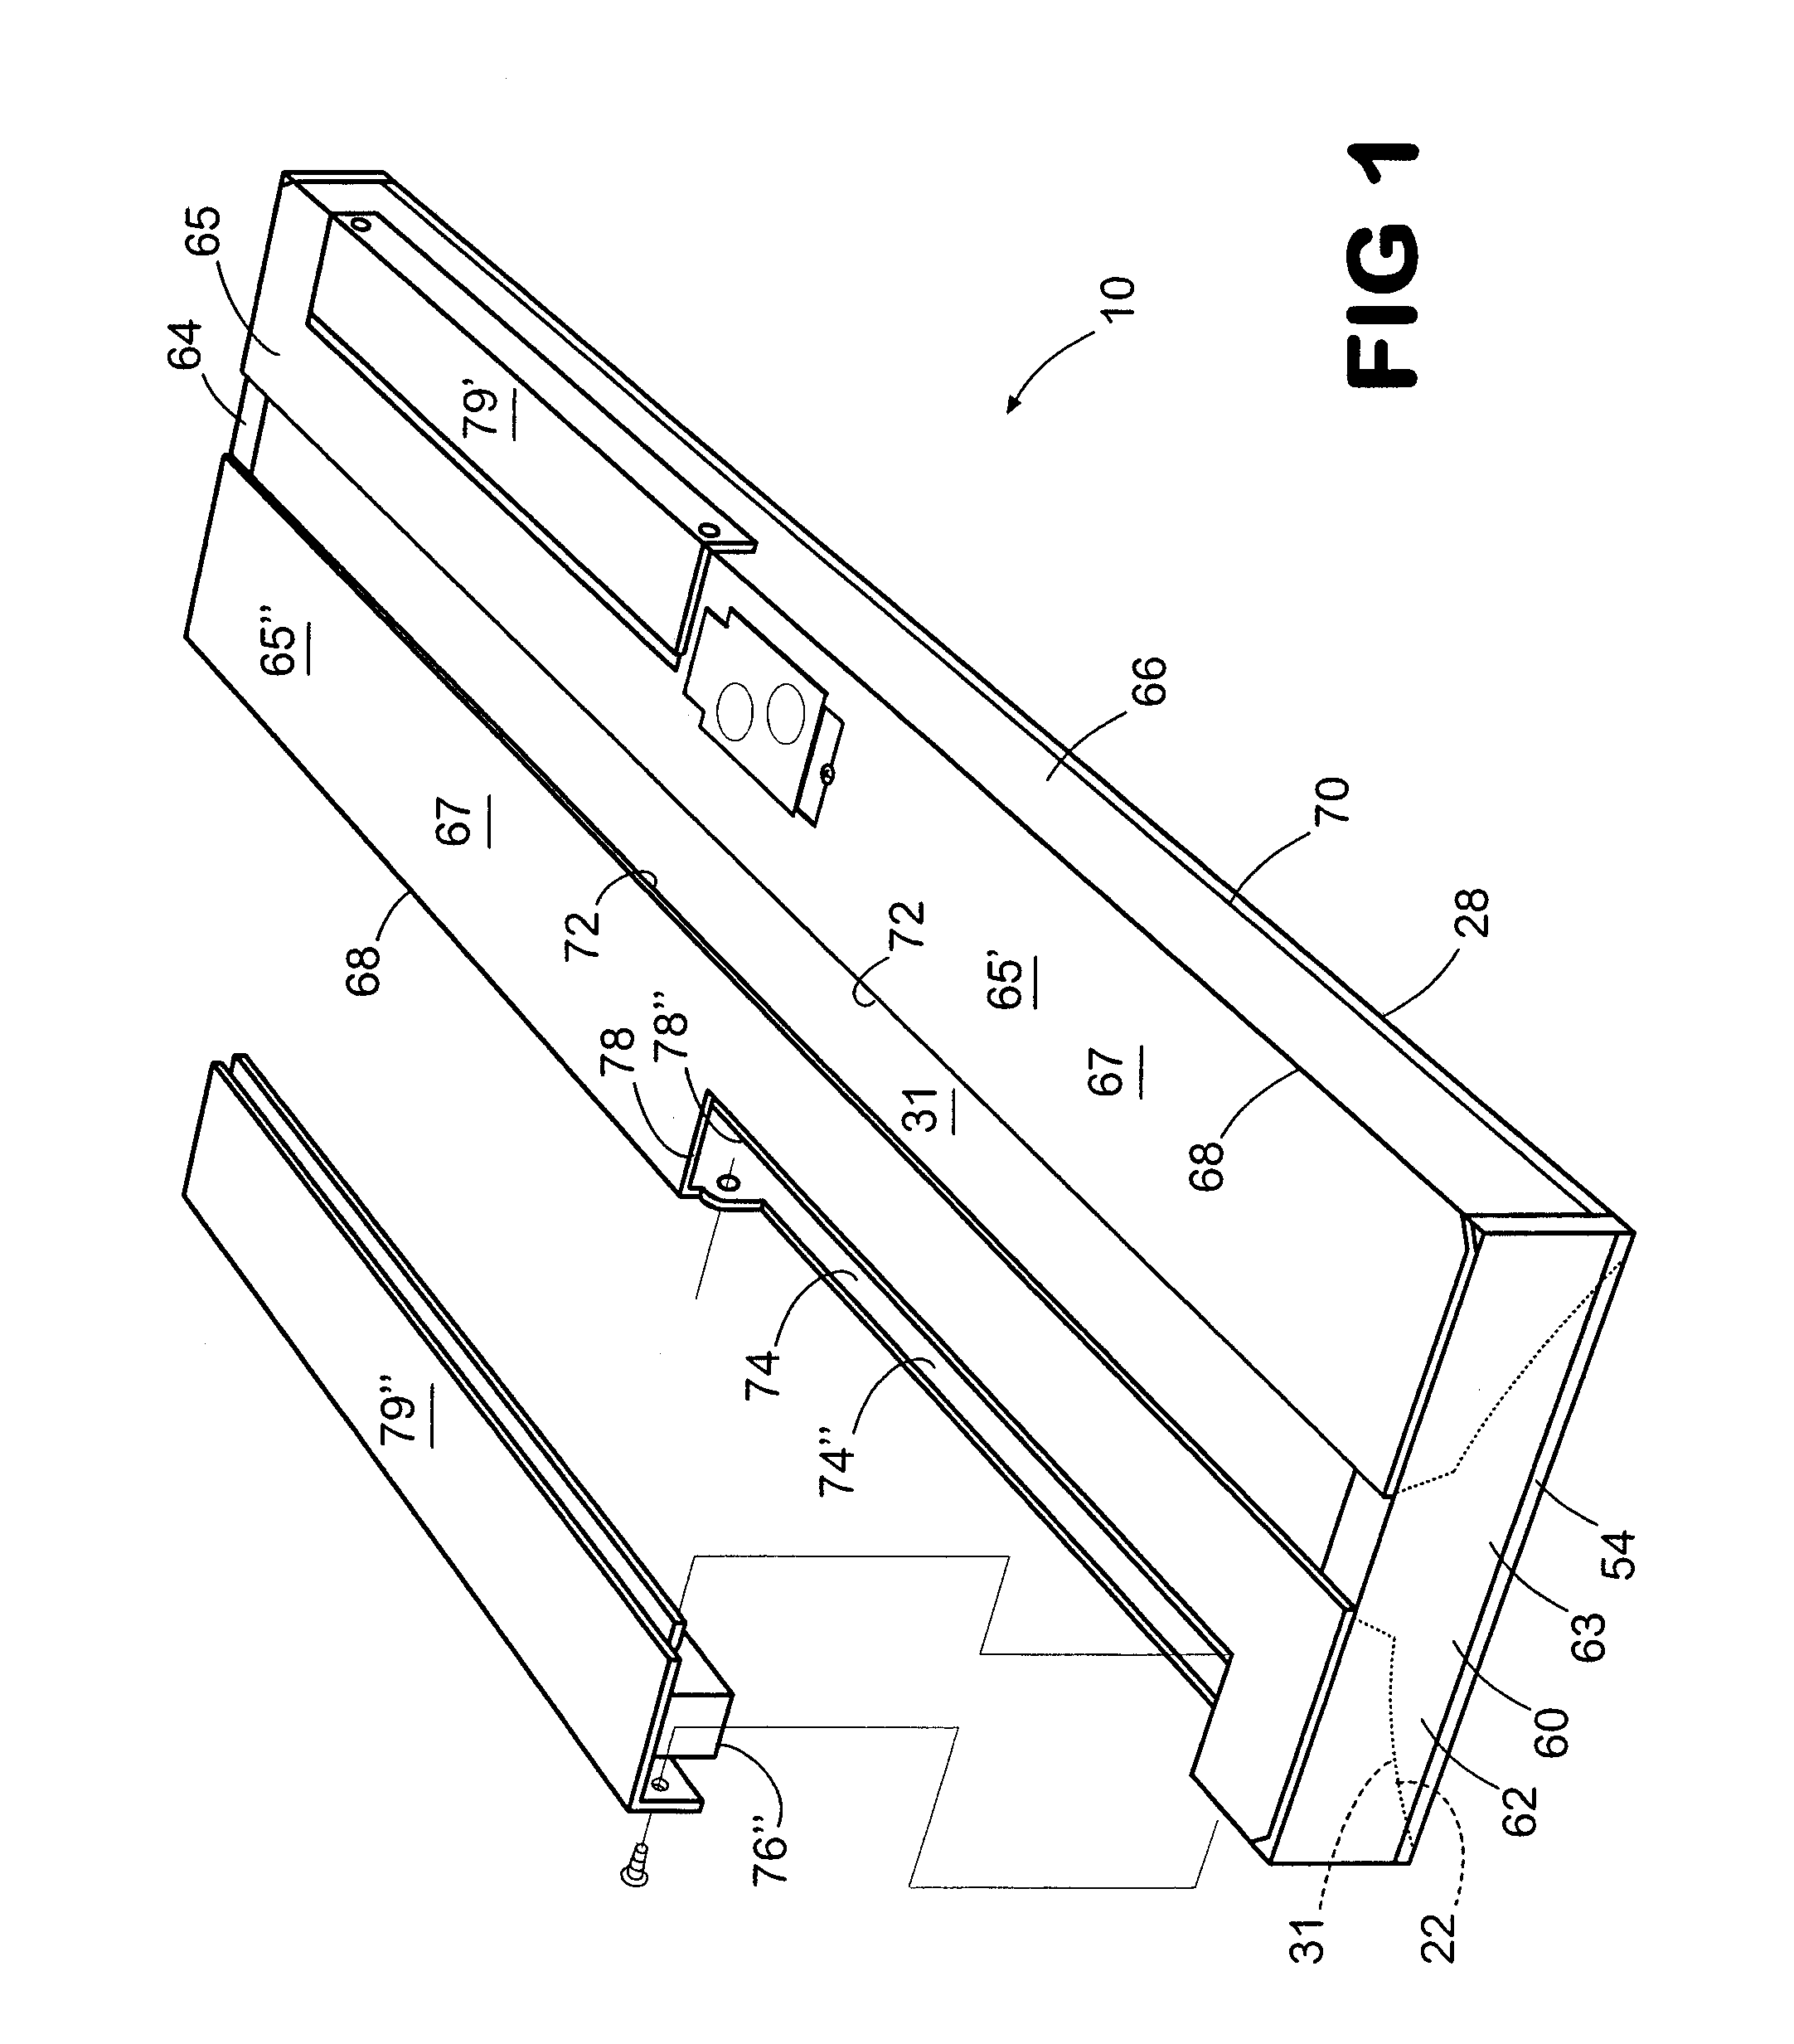 Light fixture having a reflector assembly and a lens assembly for same